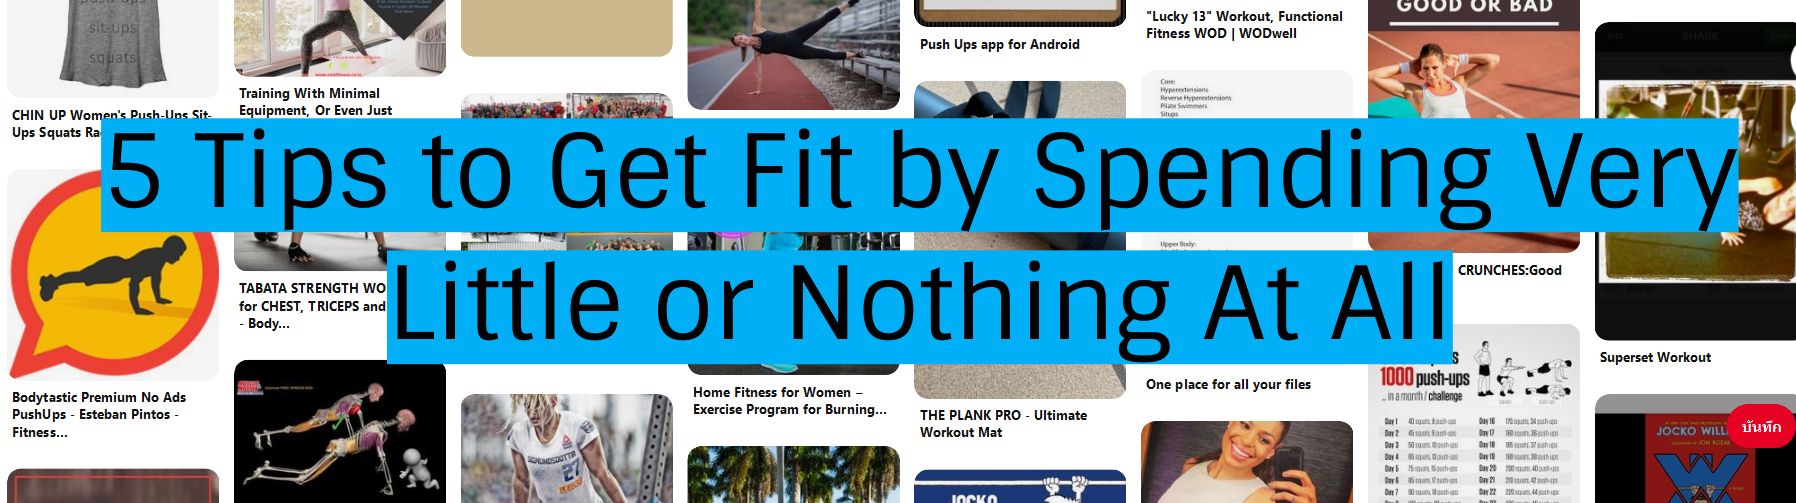 5 Tips to Get Fit by Spending Very Little or Nothing At All